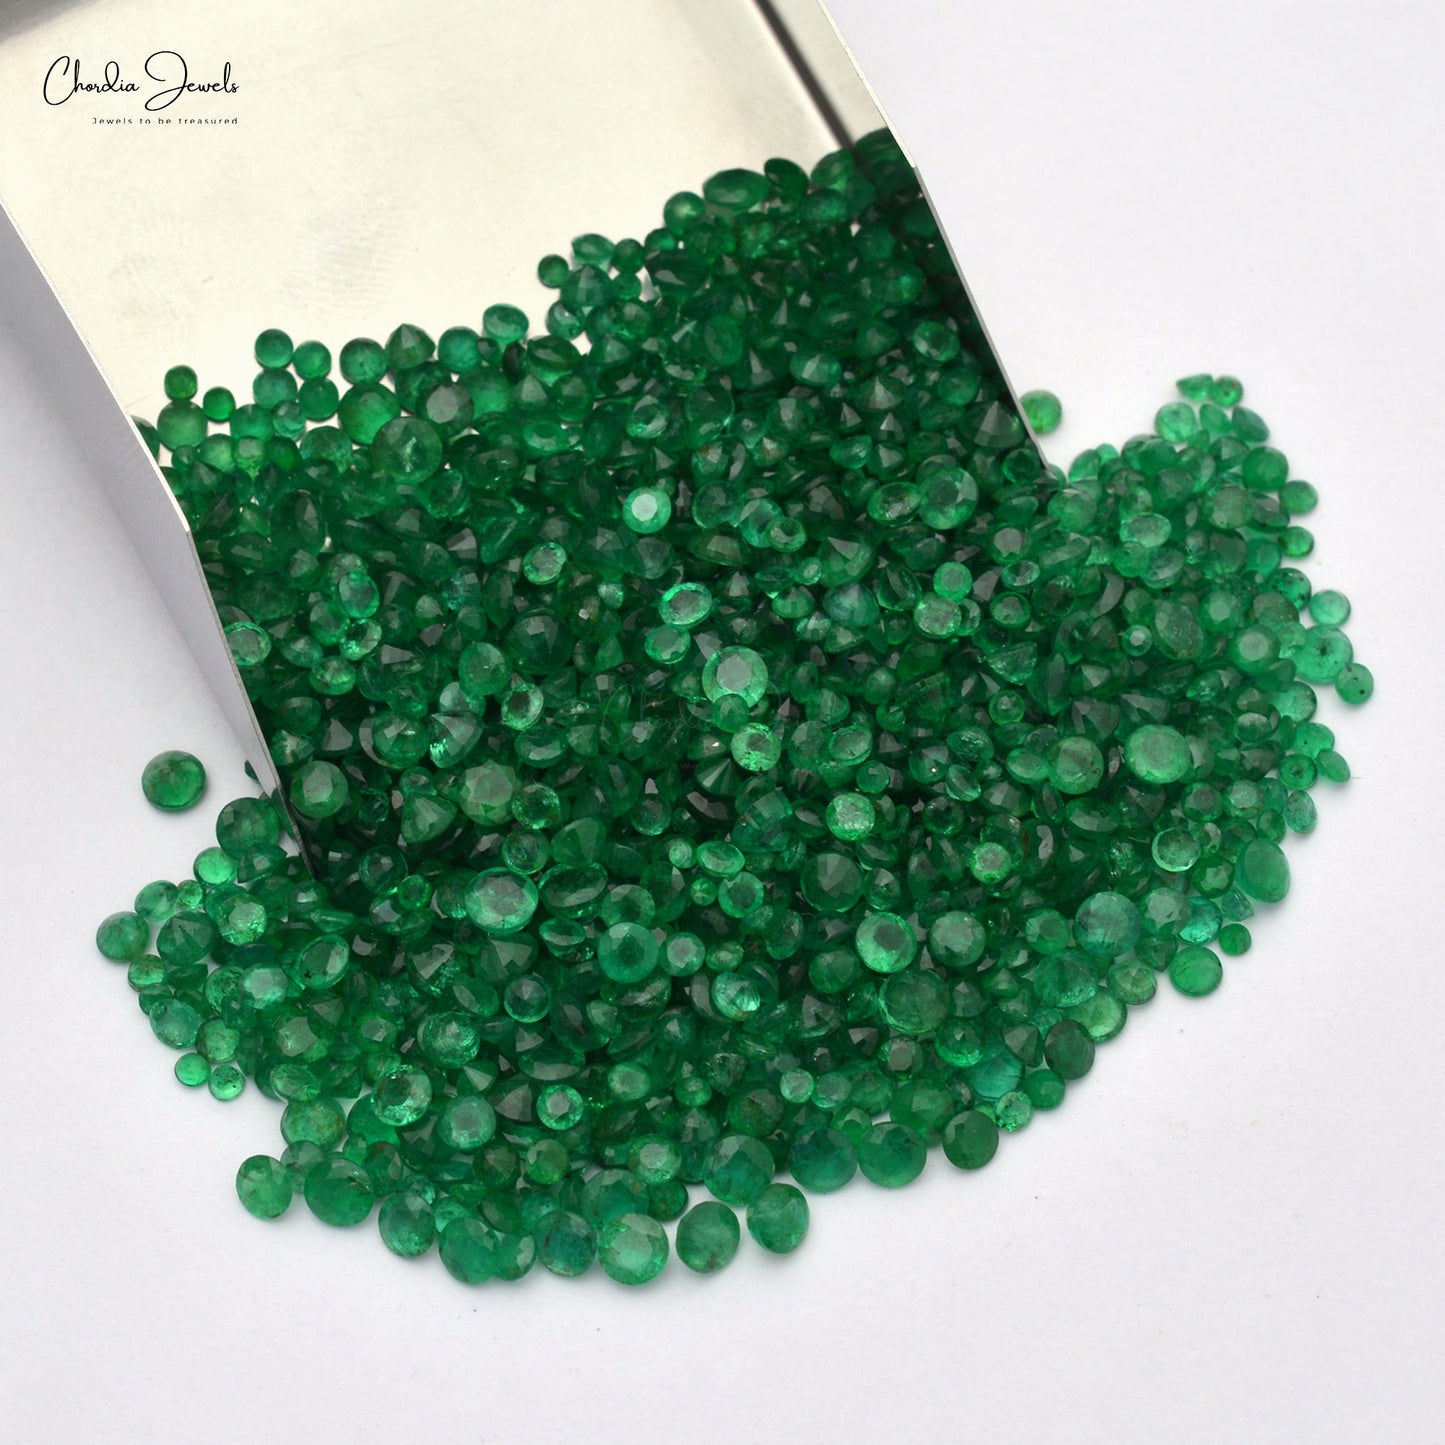 Top Quality 3 mm-3.50 mm Round Brilliant Cut Emerald Gemstone at Wholesale Price, 1 Piece